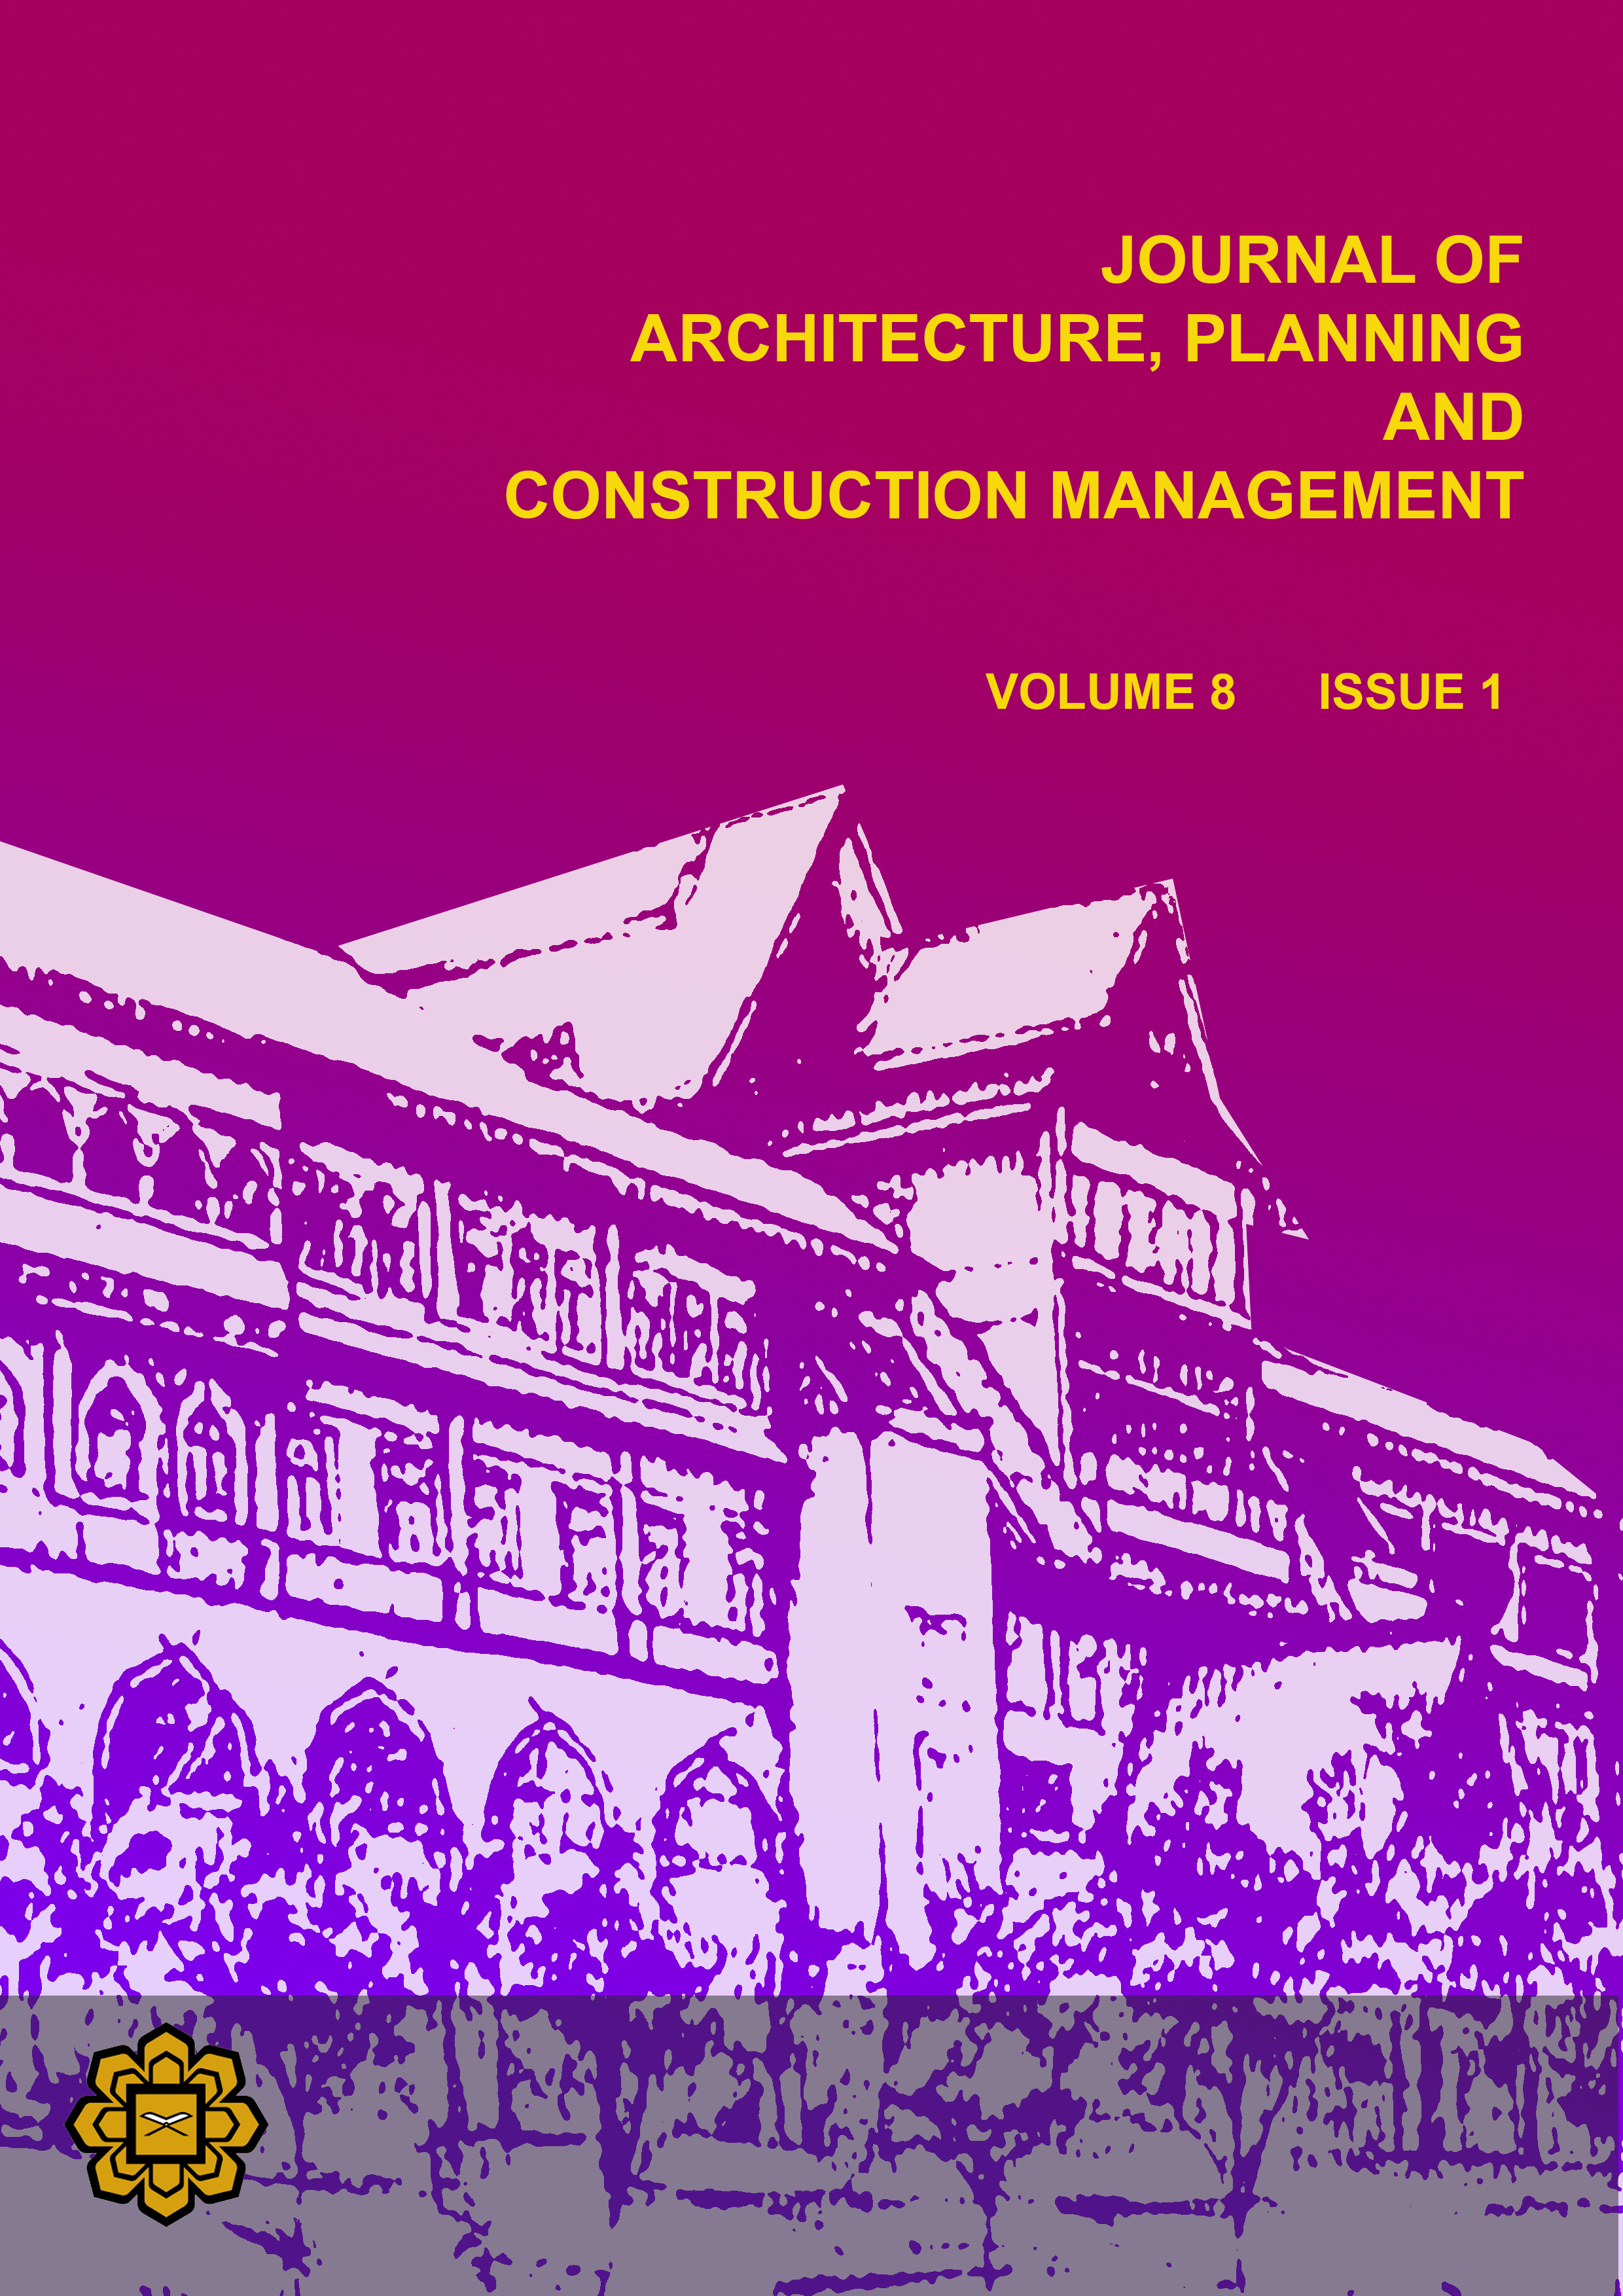 					View Vol. 8 No. 1 (2018): Journal of Architecture, Planning and Construction Management
				